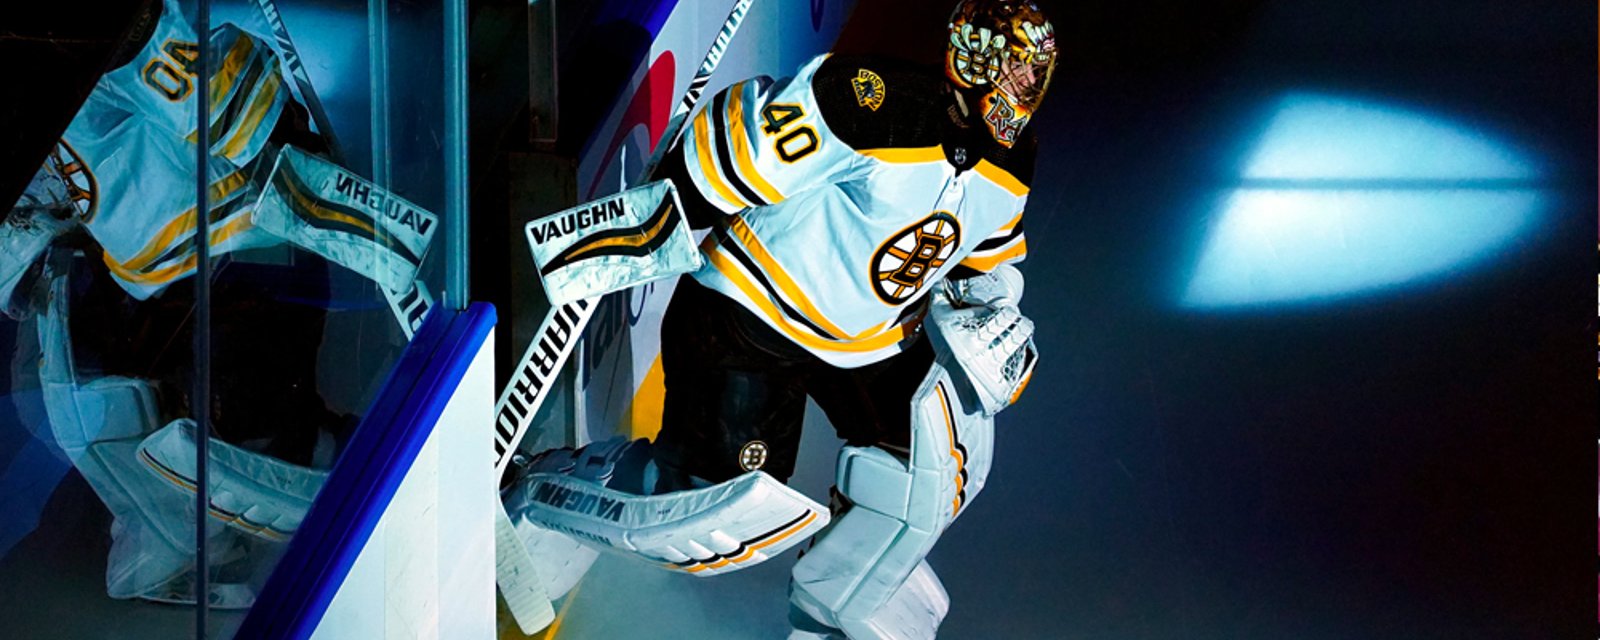 Rumor: Rask has played his last game for the Bruins